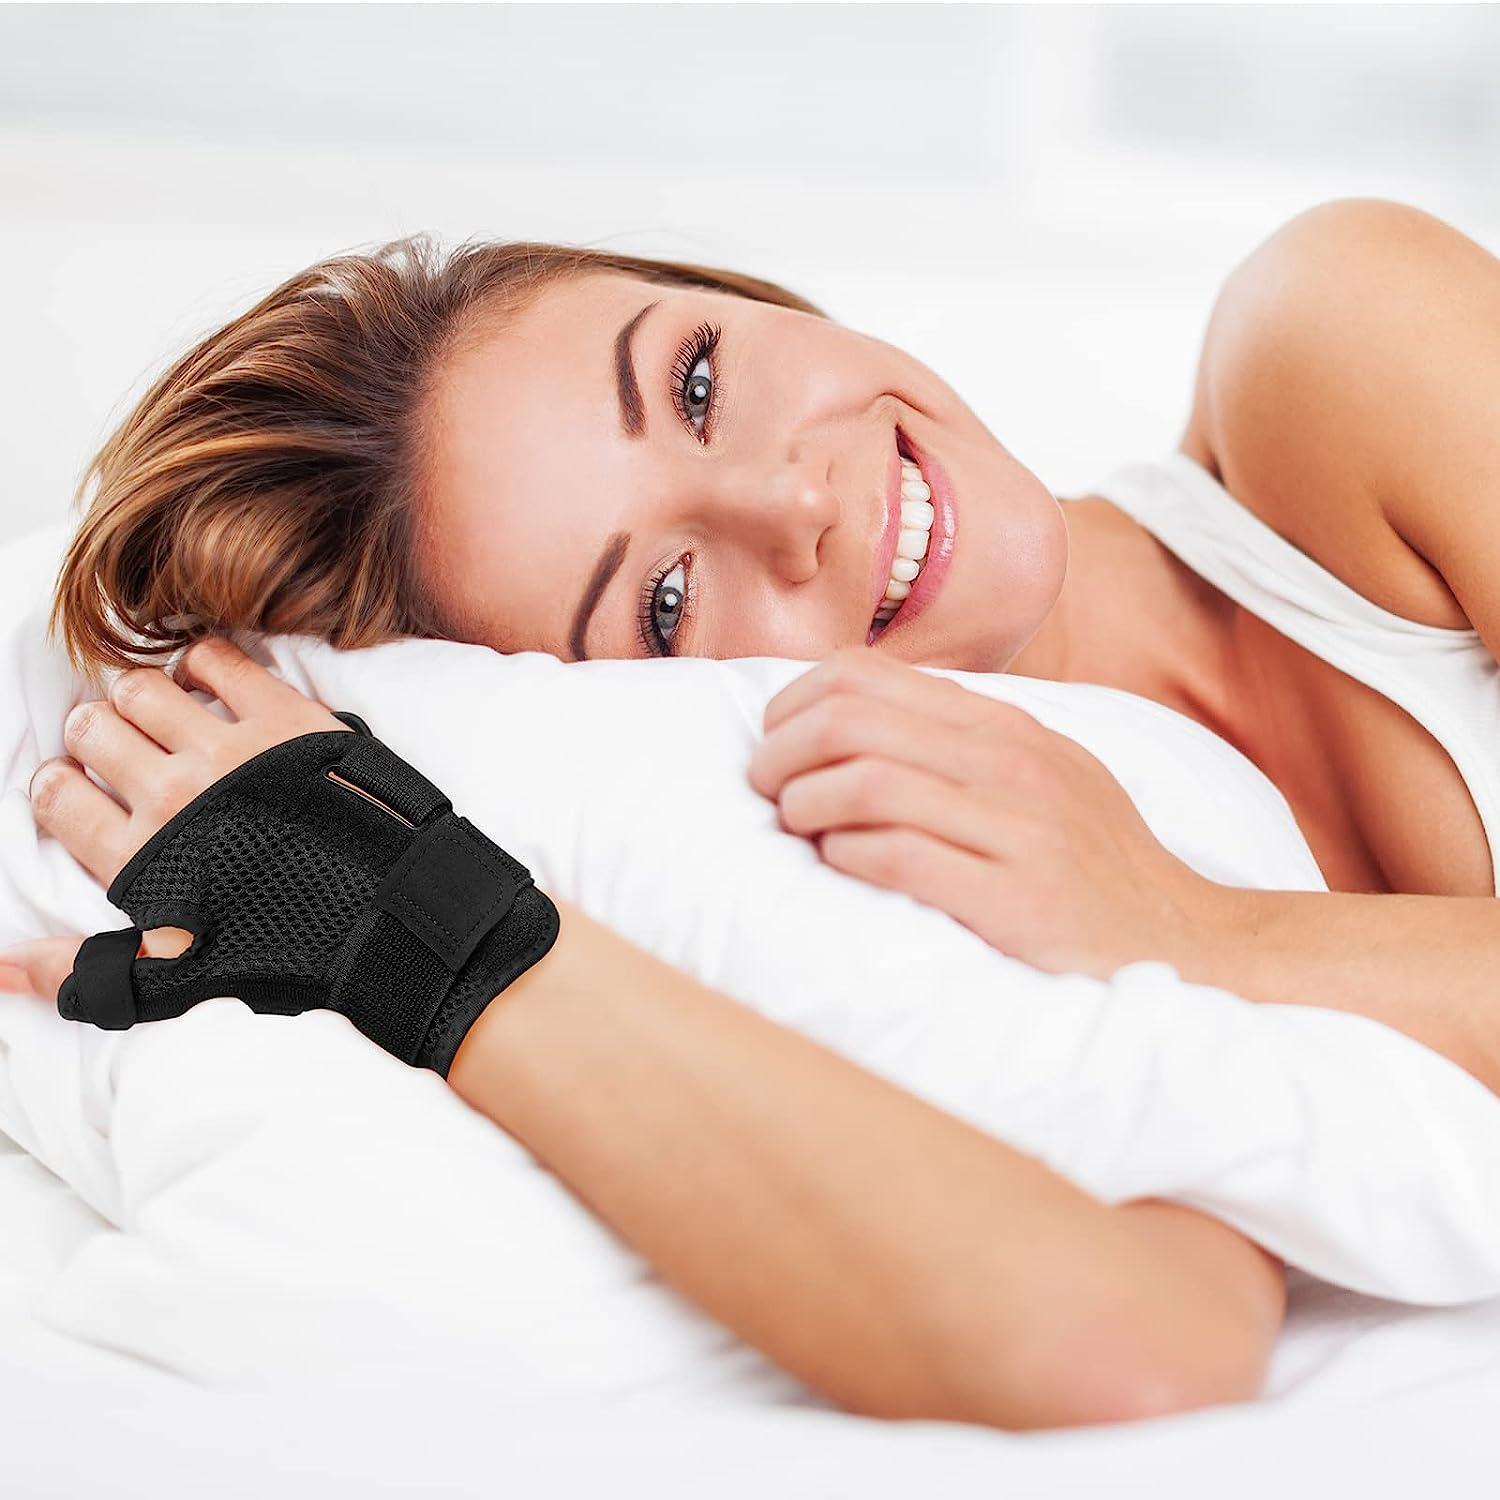 Thumb Brace - Carpal Tunnel Wrist Brace Relief and Tendinitis Arthritis  Sprained, Thumb Spica Splint Wrist Support to Help Sleep, Treat Trigger Finger  Splint Sprained Relieve Pain - Fit Left and Right